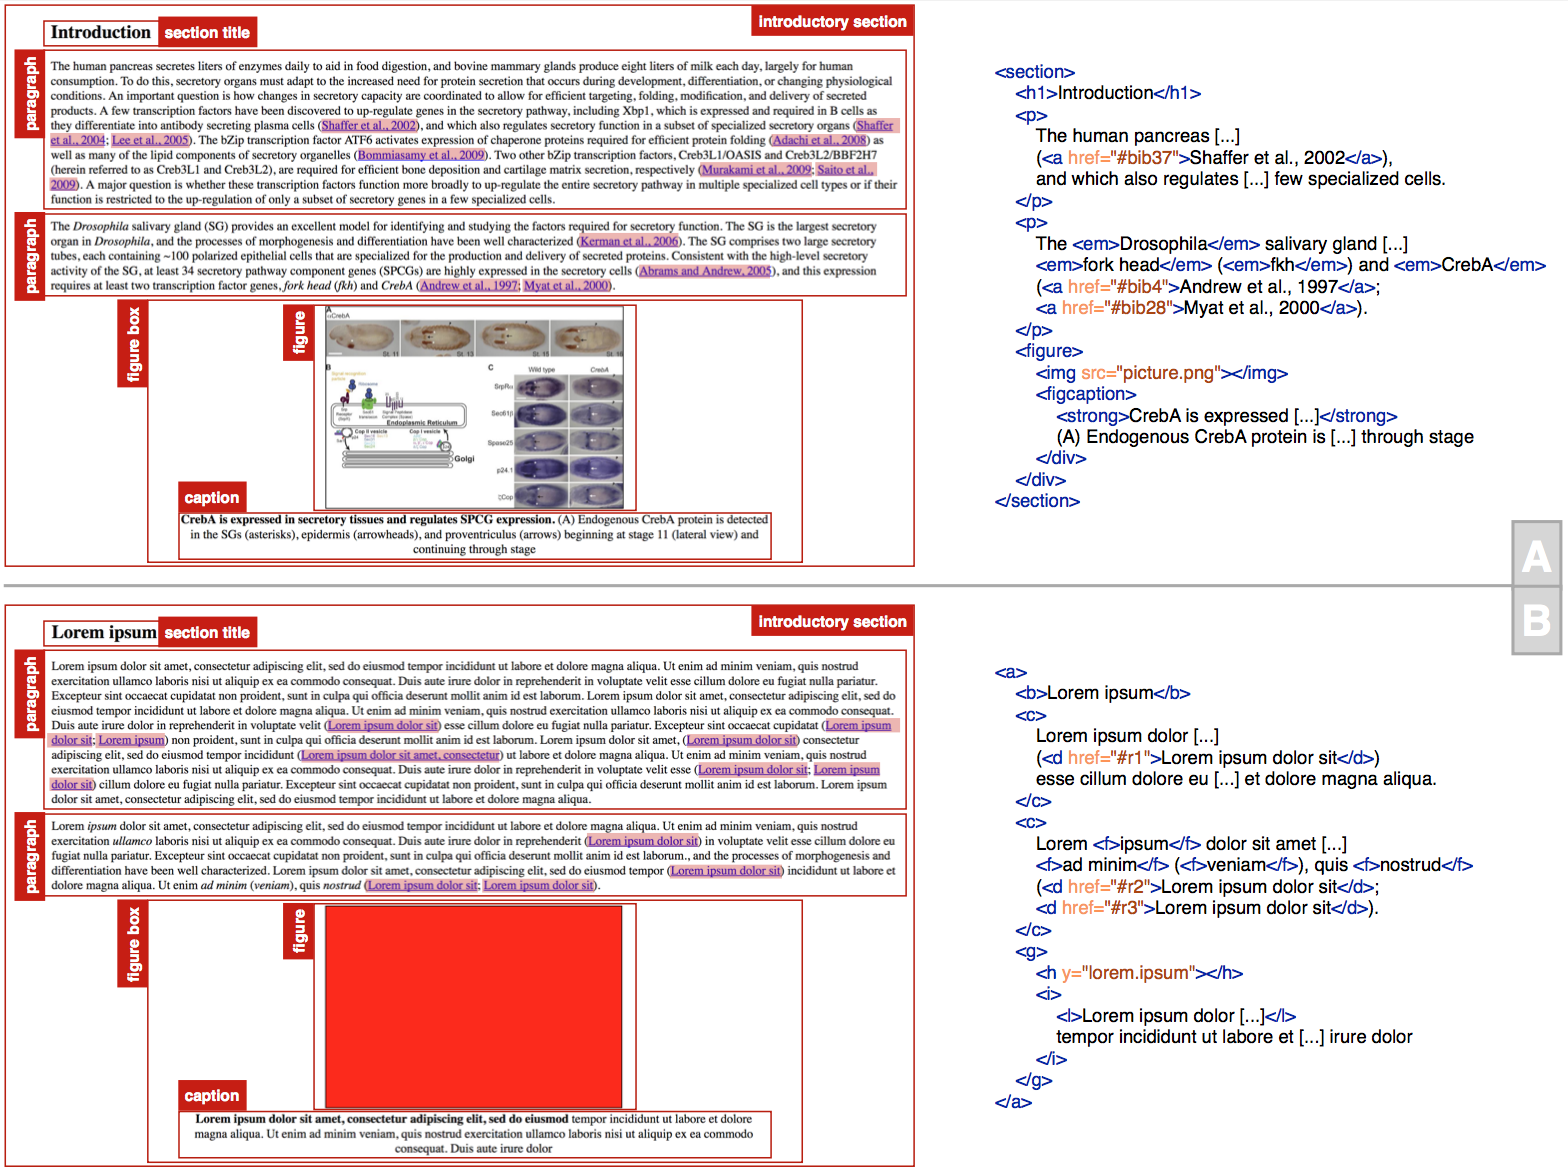 The partial HTML version of a portion of the article entitled "The CrebA/Creb3-like transcription factors are major and direct regulators of secretory capacity" [top panel (A)], and the same containment structure [bottom panel (B)] stored according to a fictional XML-based language, where no meaningful textual or visual content is explicit. The empty boxes with a red border, the blue-underlined strings, as well as the italic and strong strings, describe the various parts of the article. The pink rectangles delimit in-text reference pointers to some bibliographic references, while the meaning of the other parts is defined by means of the red labels with white text.